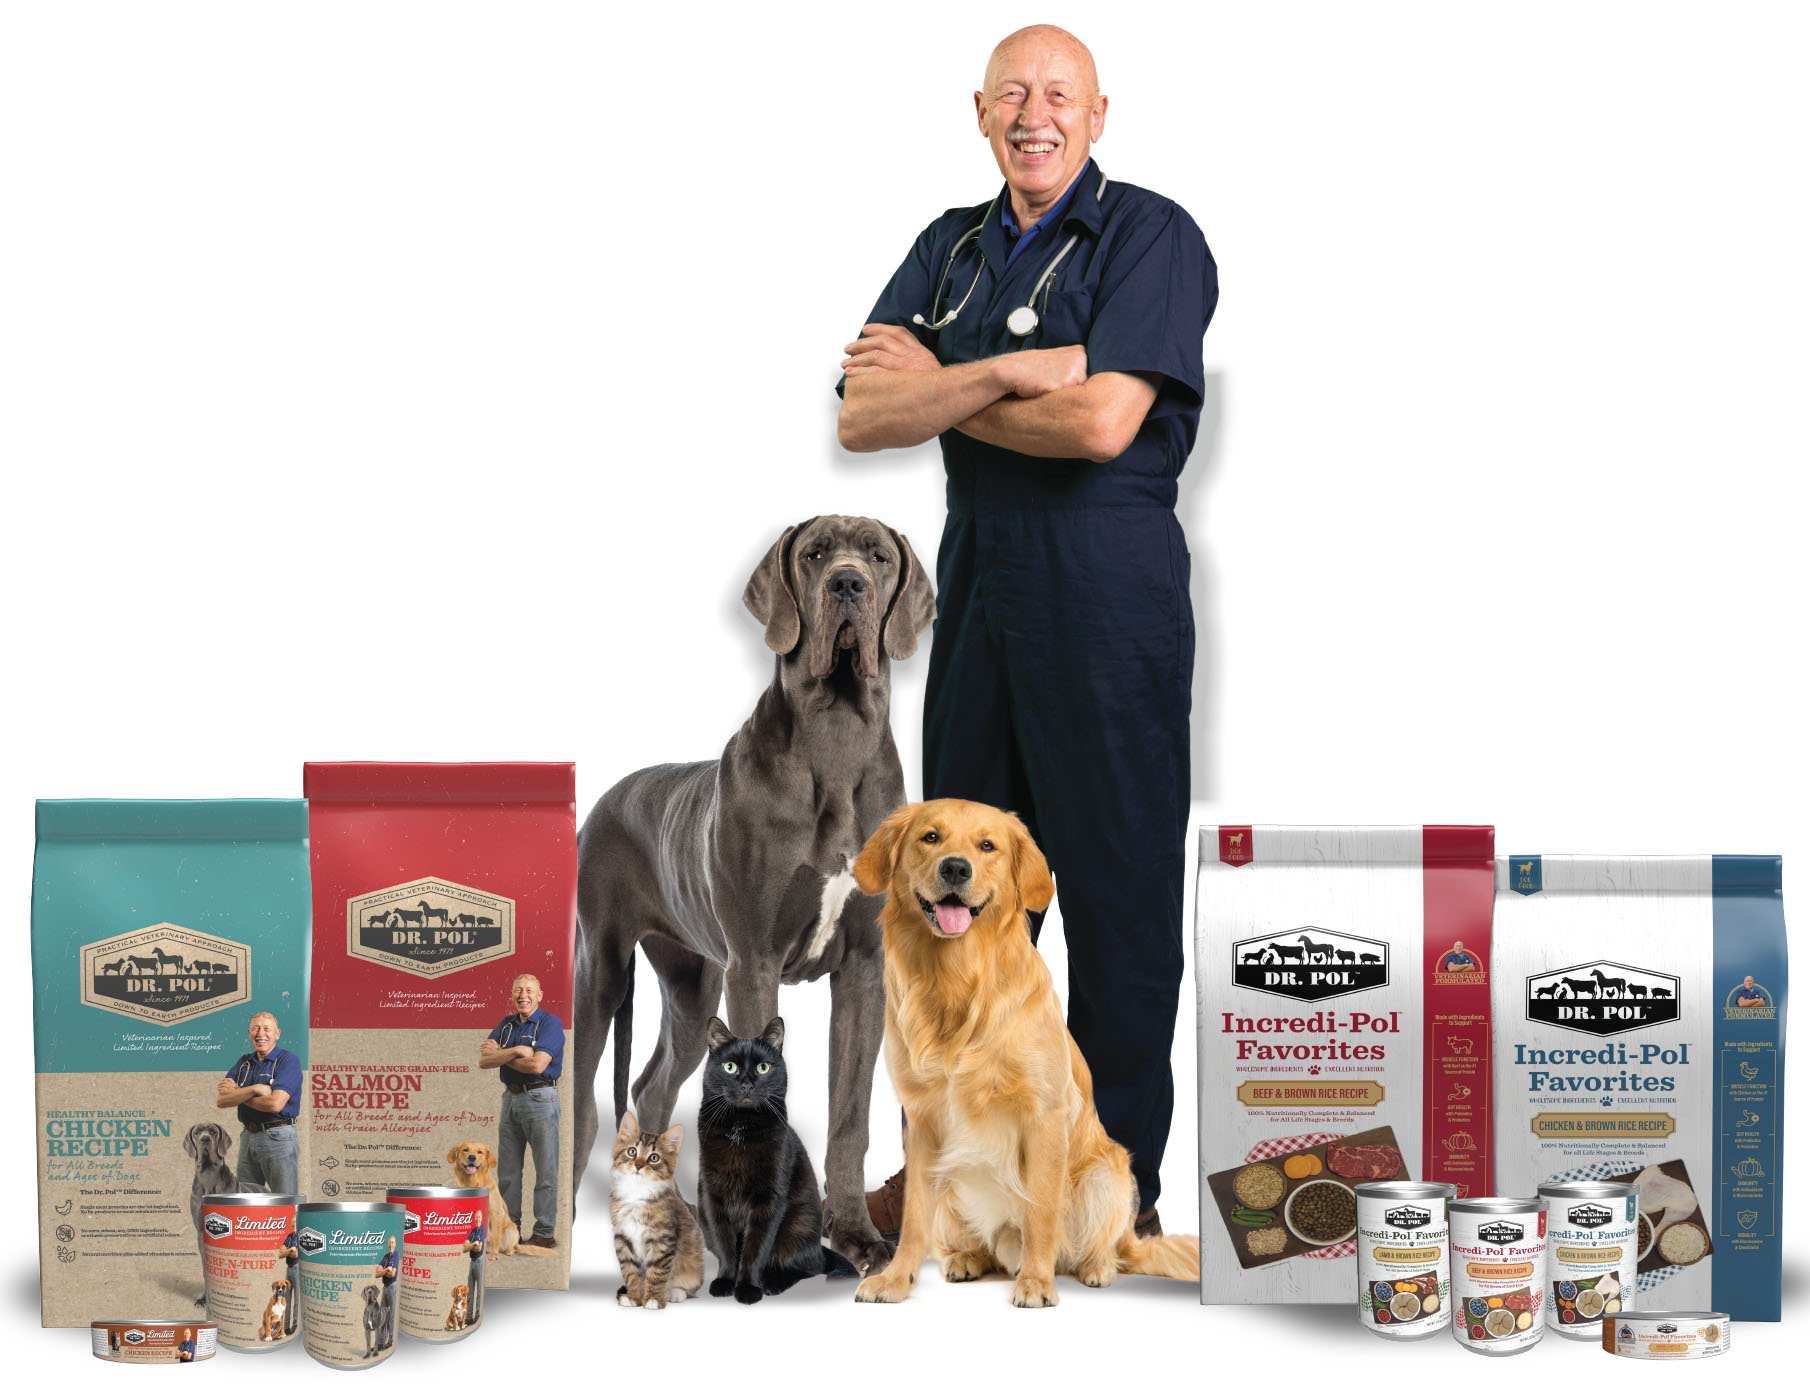 Dr. Pol will showcase its new wet pet foods, as well as other pet supplies during Global Pet Expo 2024